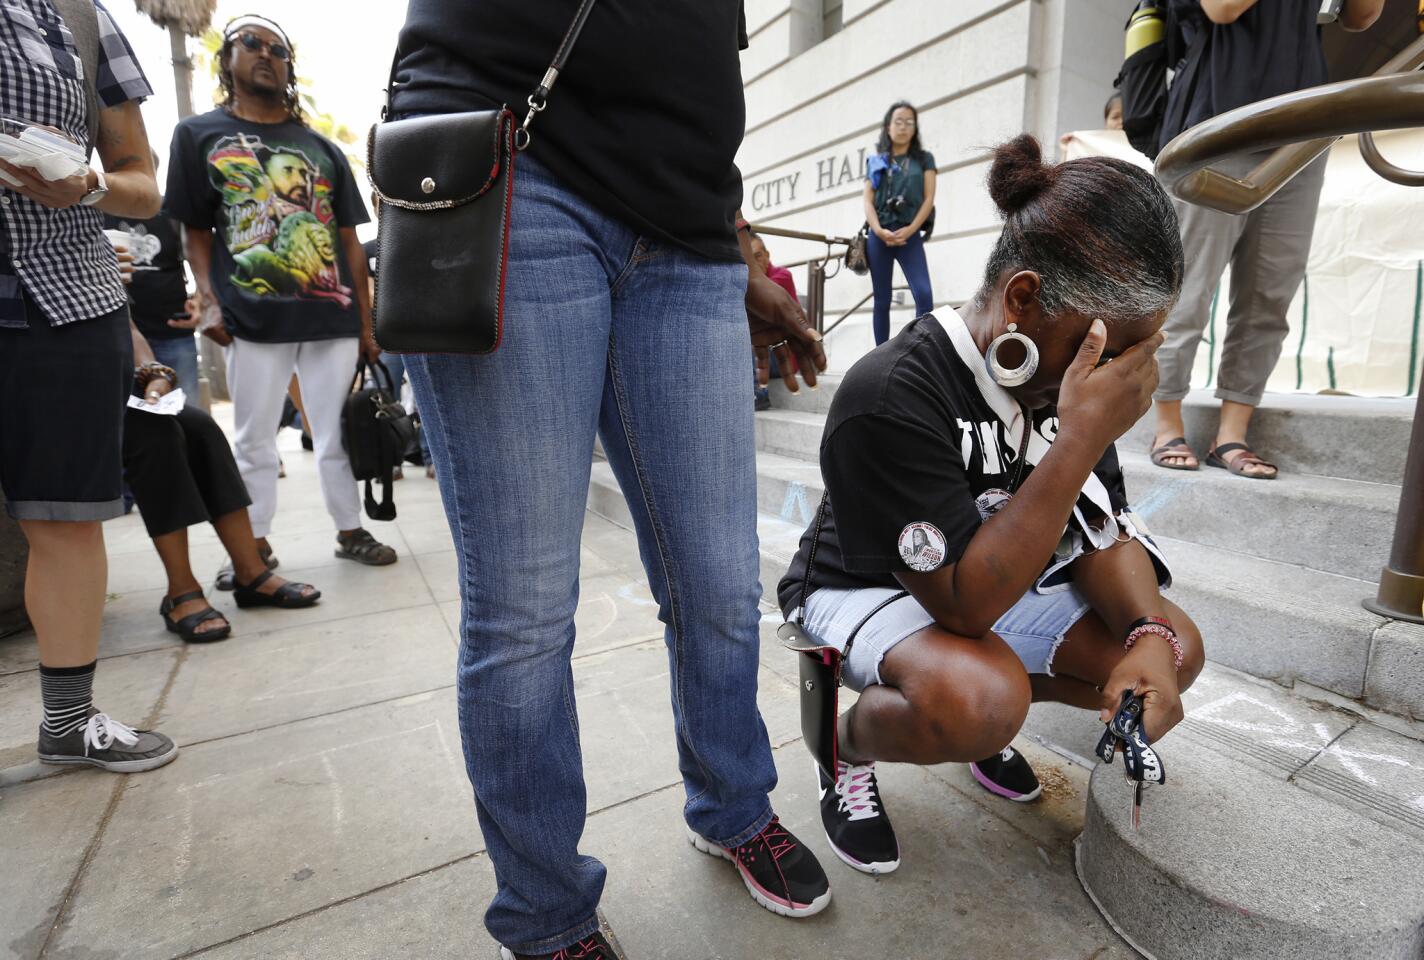 Sheila Hines, aunt of Wakiesha Wilson, who was found dead in her jail cell in March, is in tears after an L.A. Police Commission meeting. Family members have sought more information about her death.